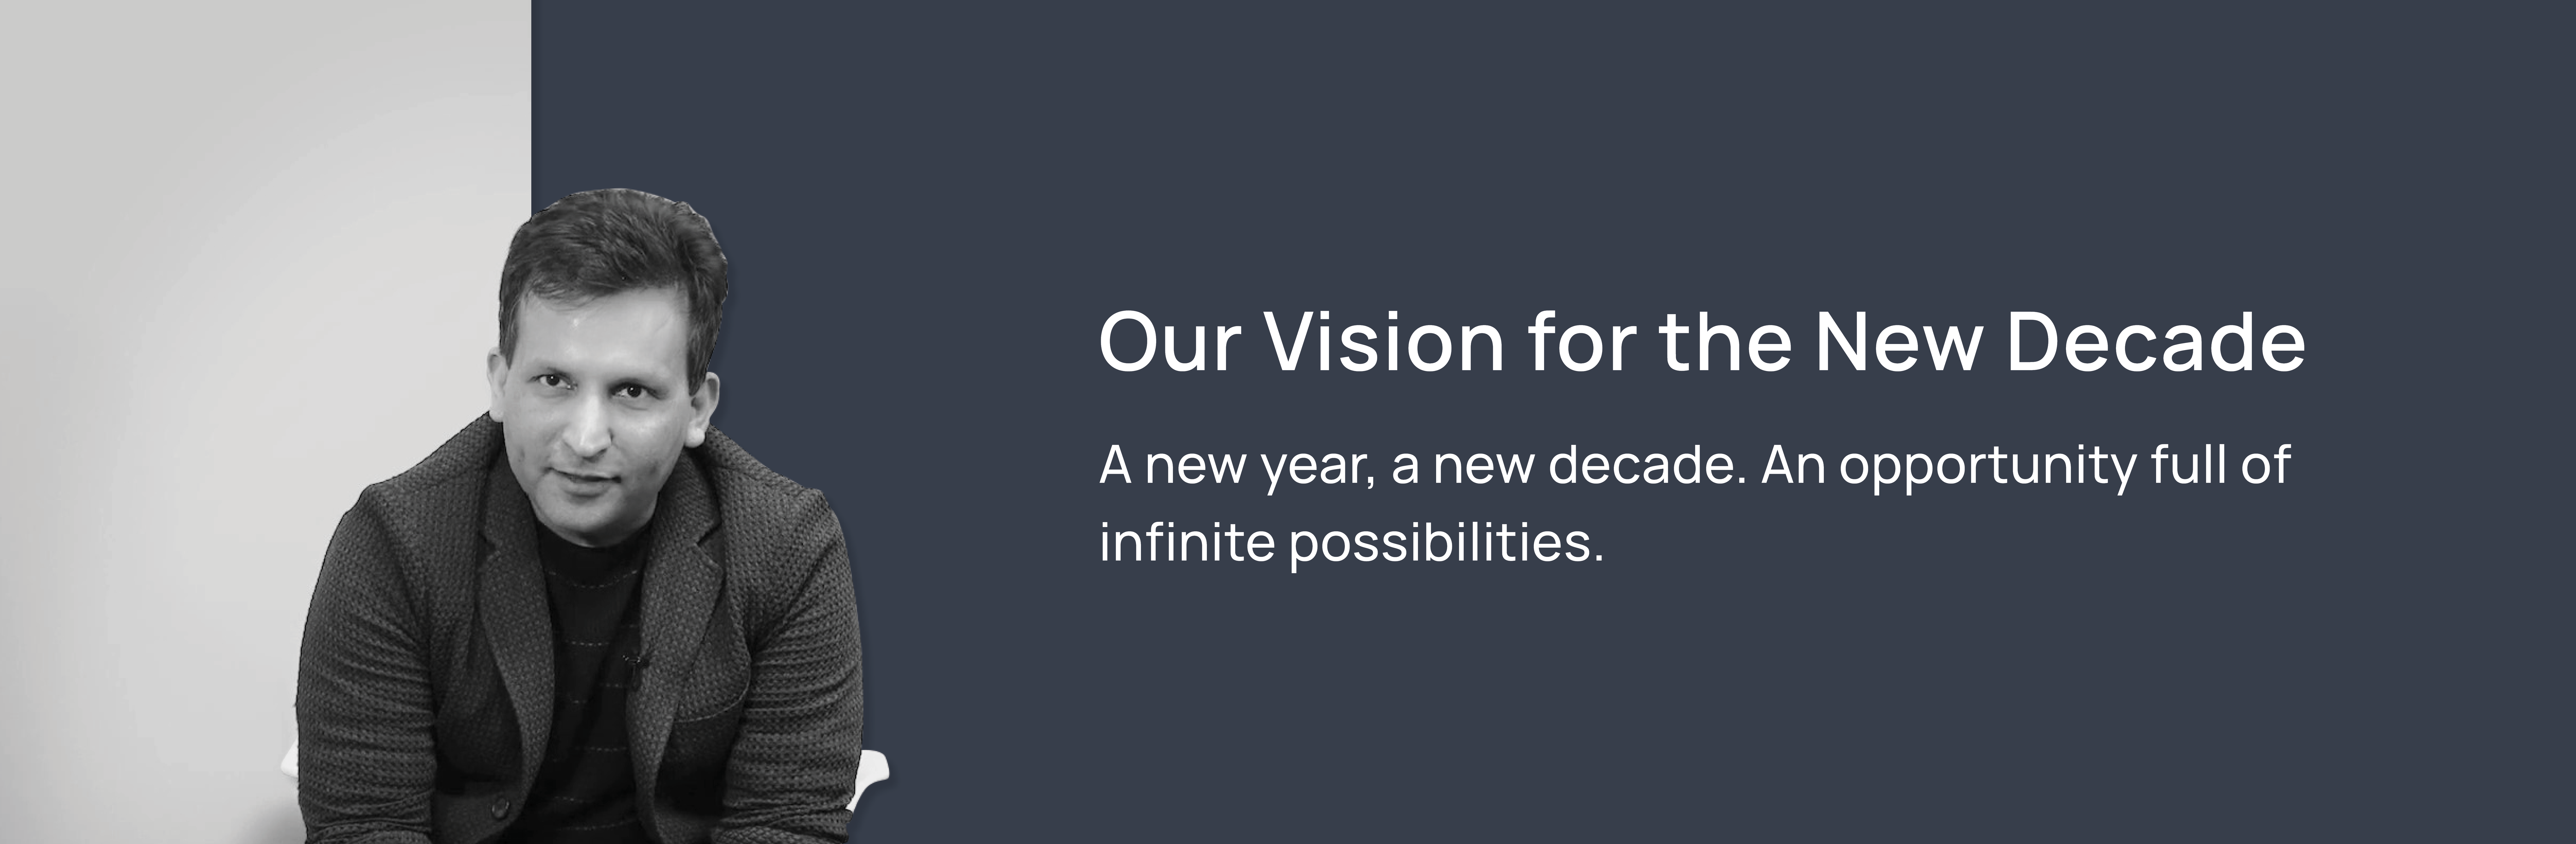 Our Vision for the New Decade- An opportunity full of infinite possibilities